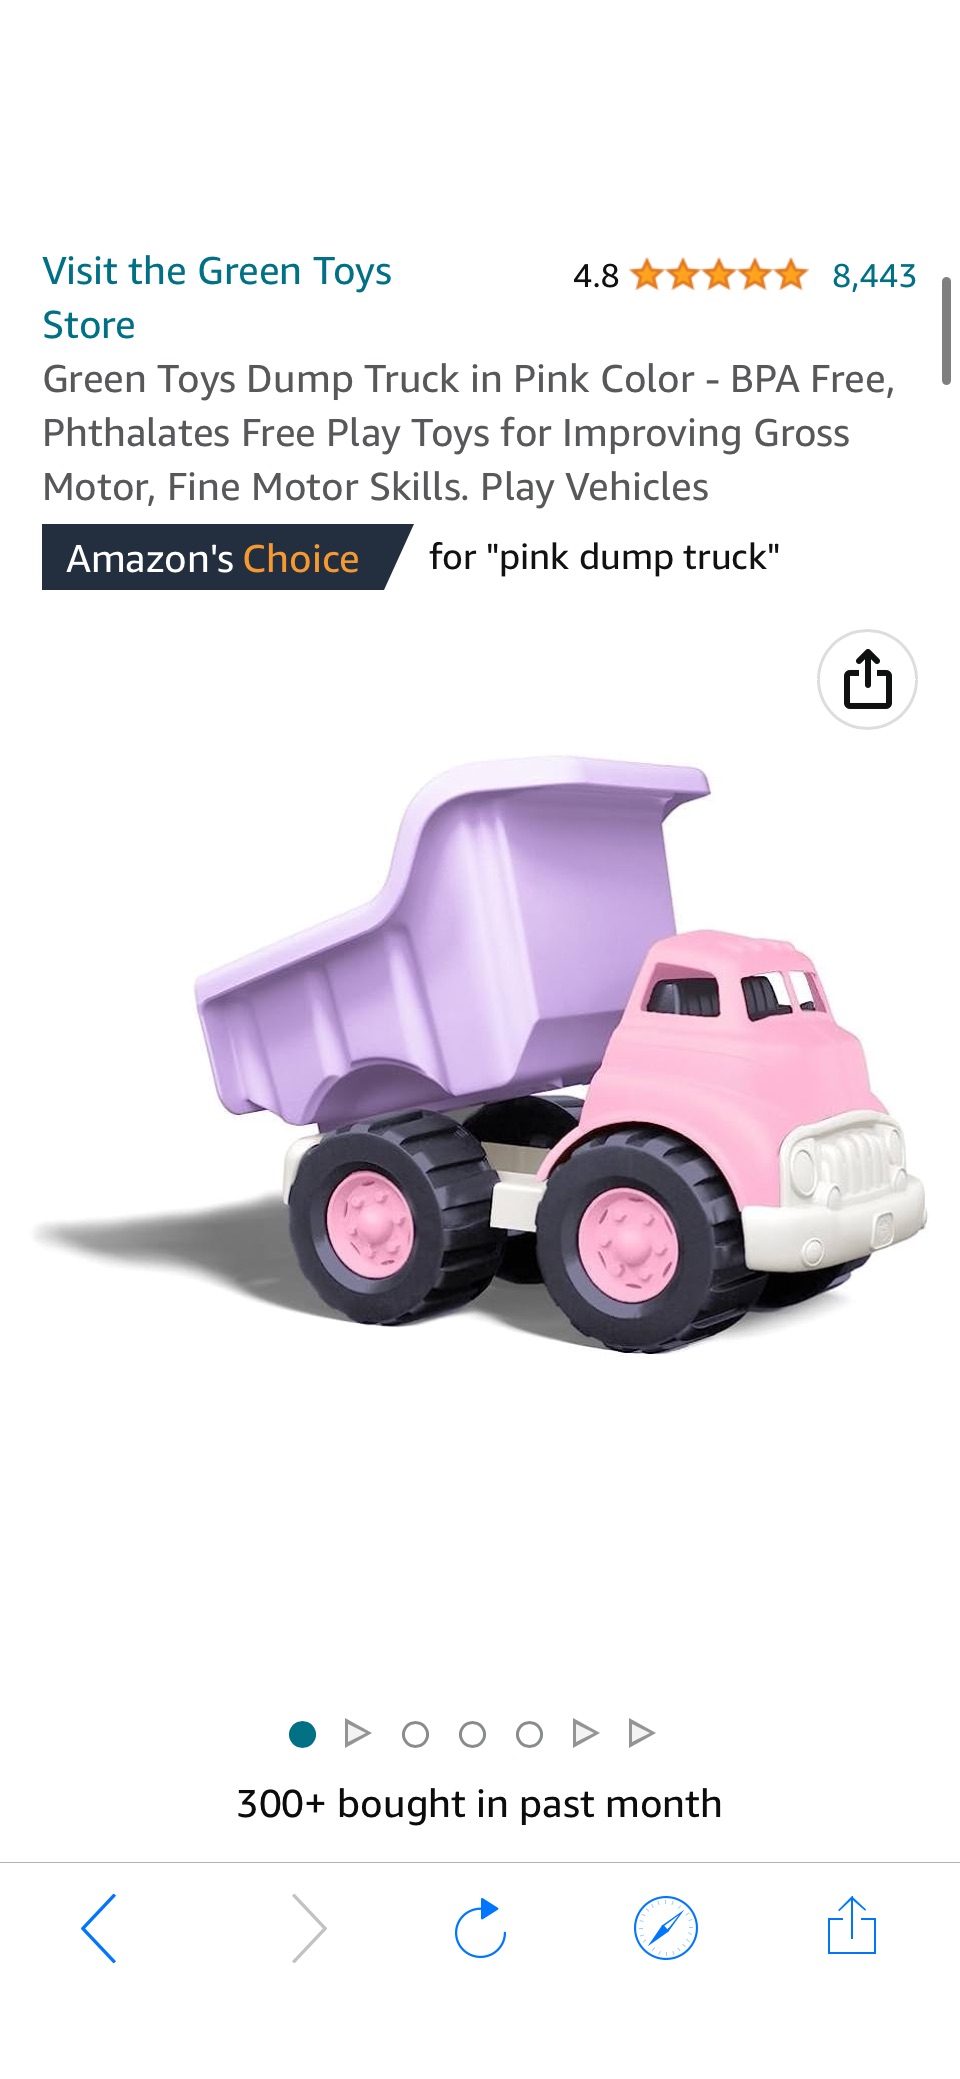 Amazon.com: Green Toys Dump Truck in Pink Color - BPA Free, Phthalates Free Play Toys for Improving Gross Motor, Fine Motor Skills. Play Vehicles : GreenToys: Toys & Games原价27.99